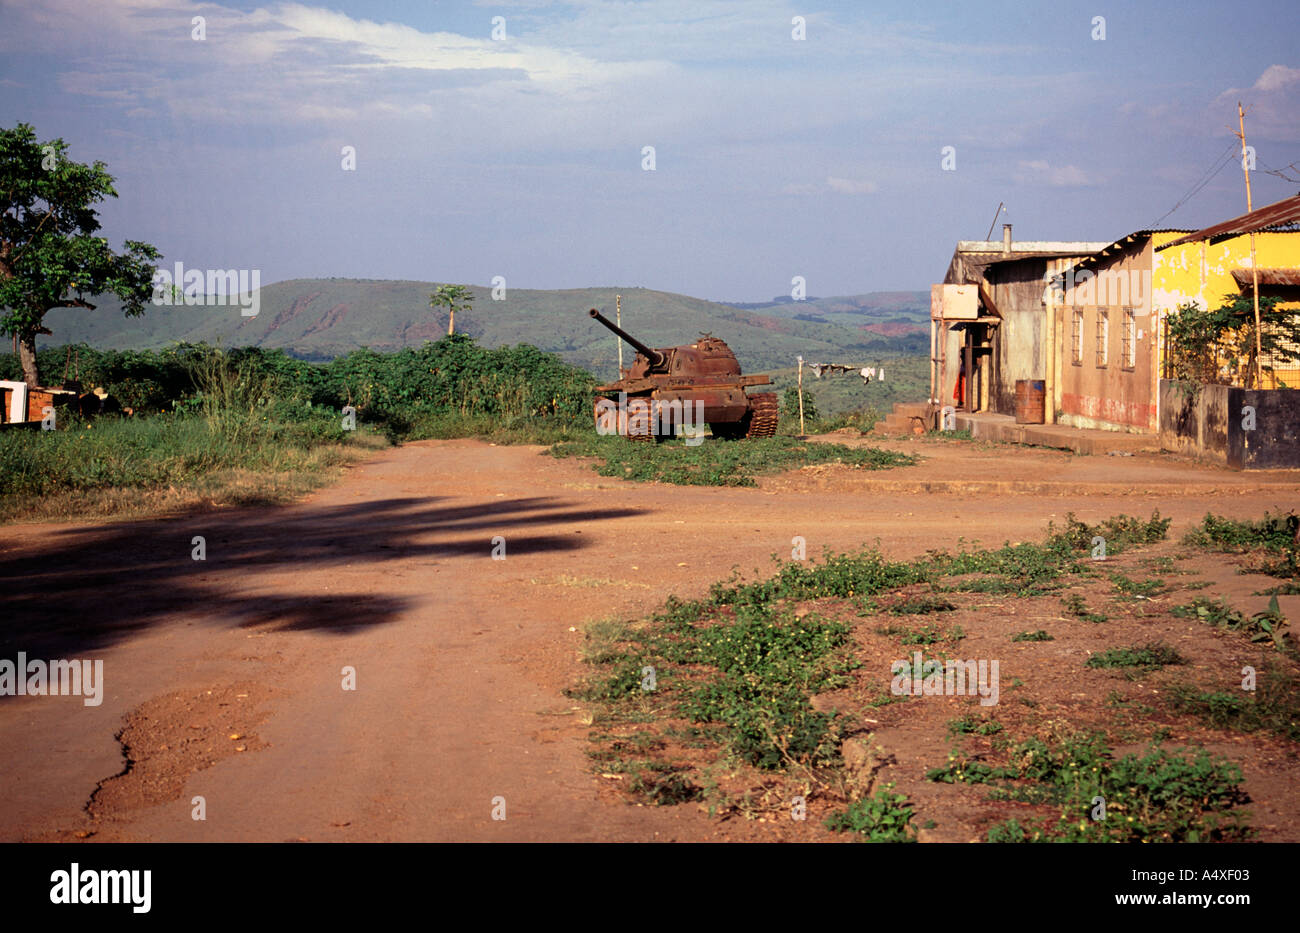 An abandoned, rusting soviet tank in the town of Mbanza Congo in northern Angola. Stock Photo